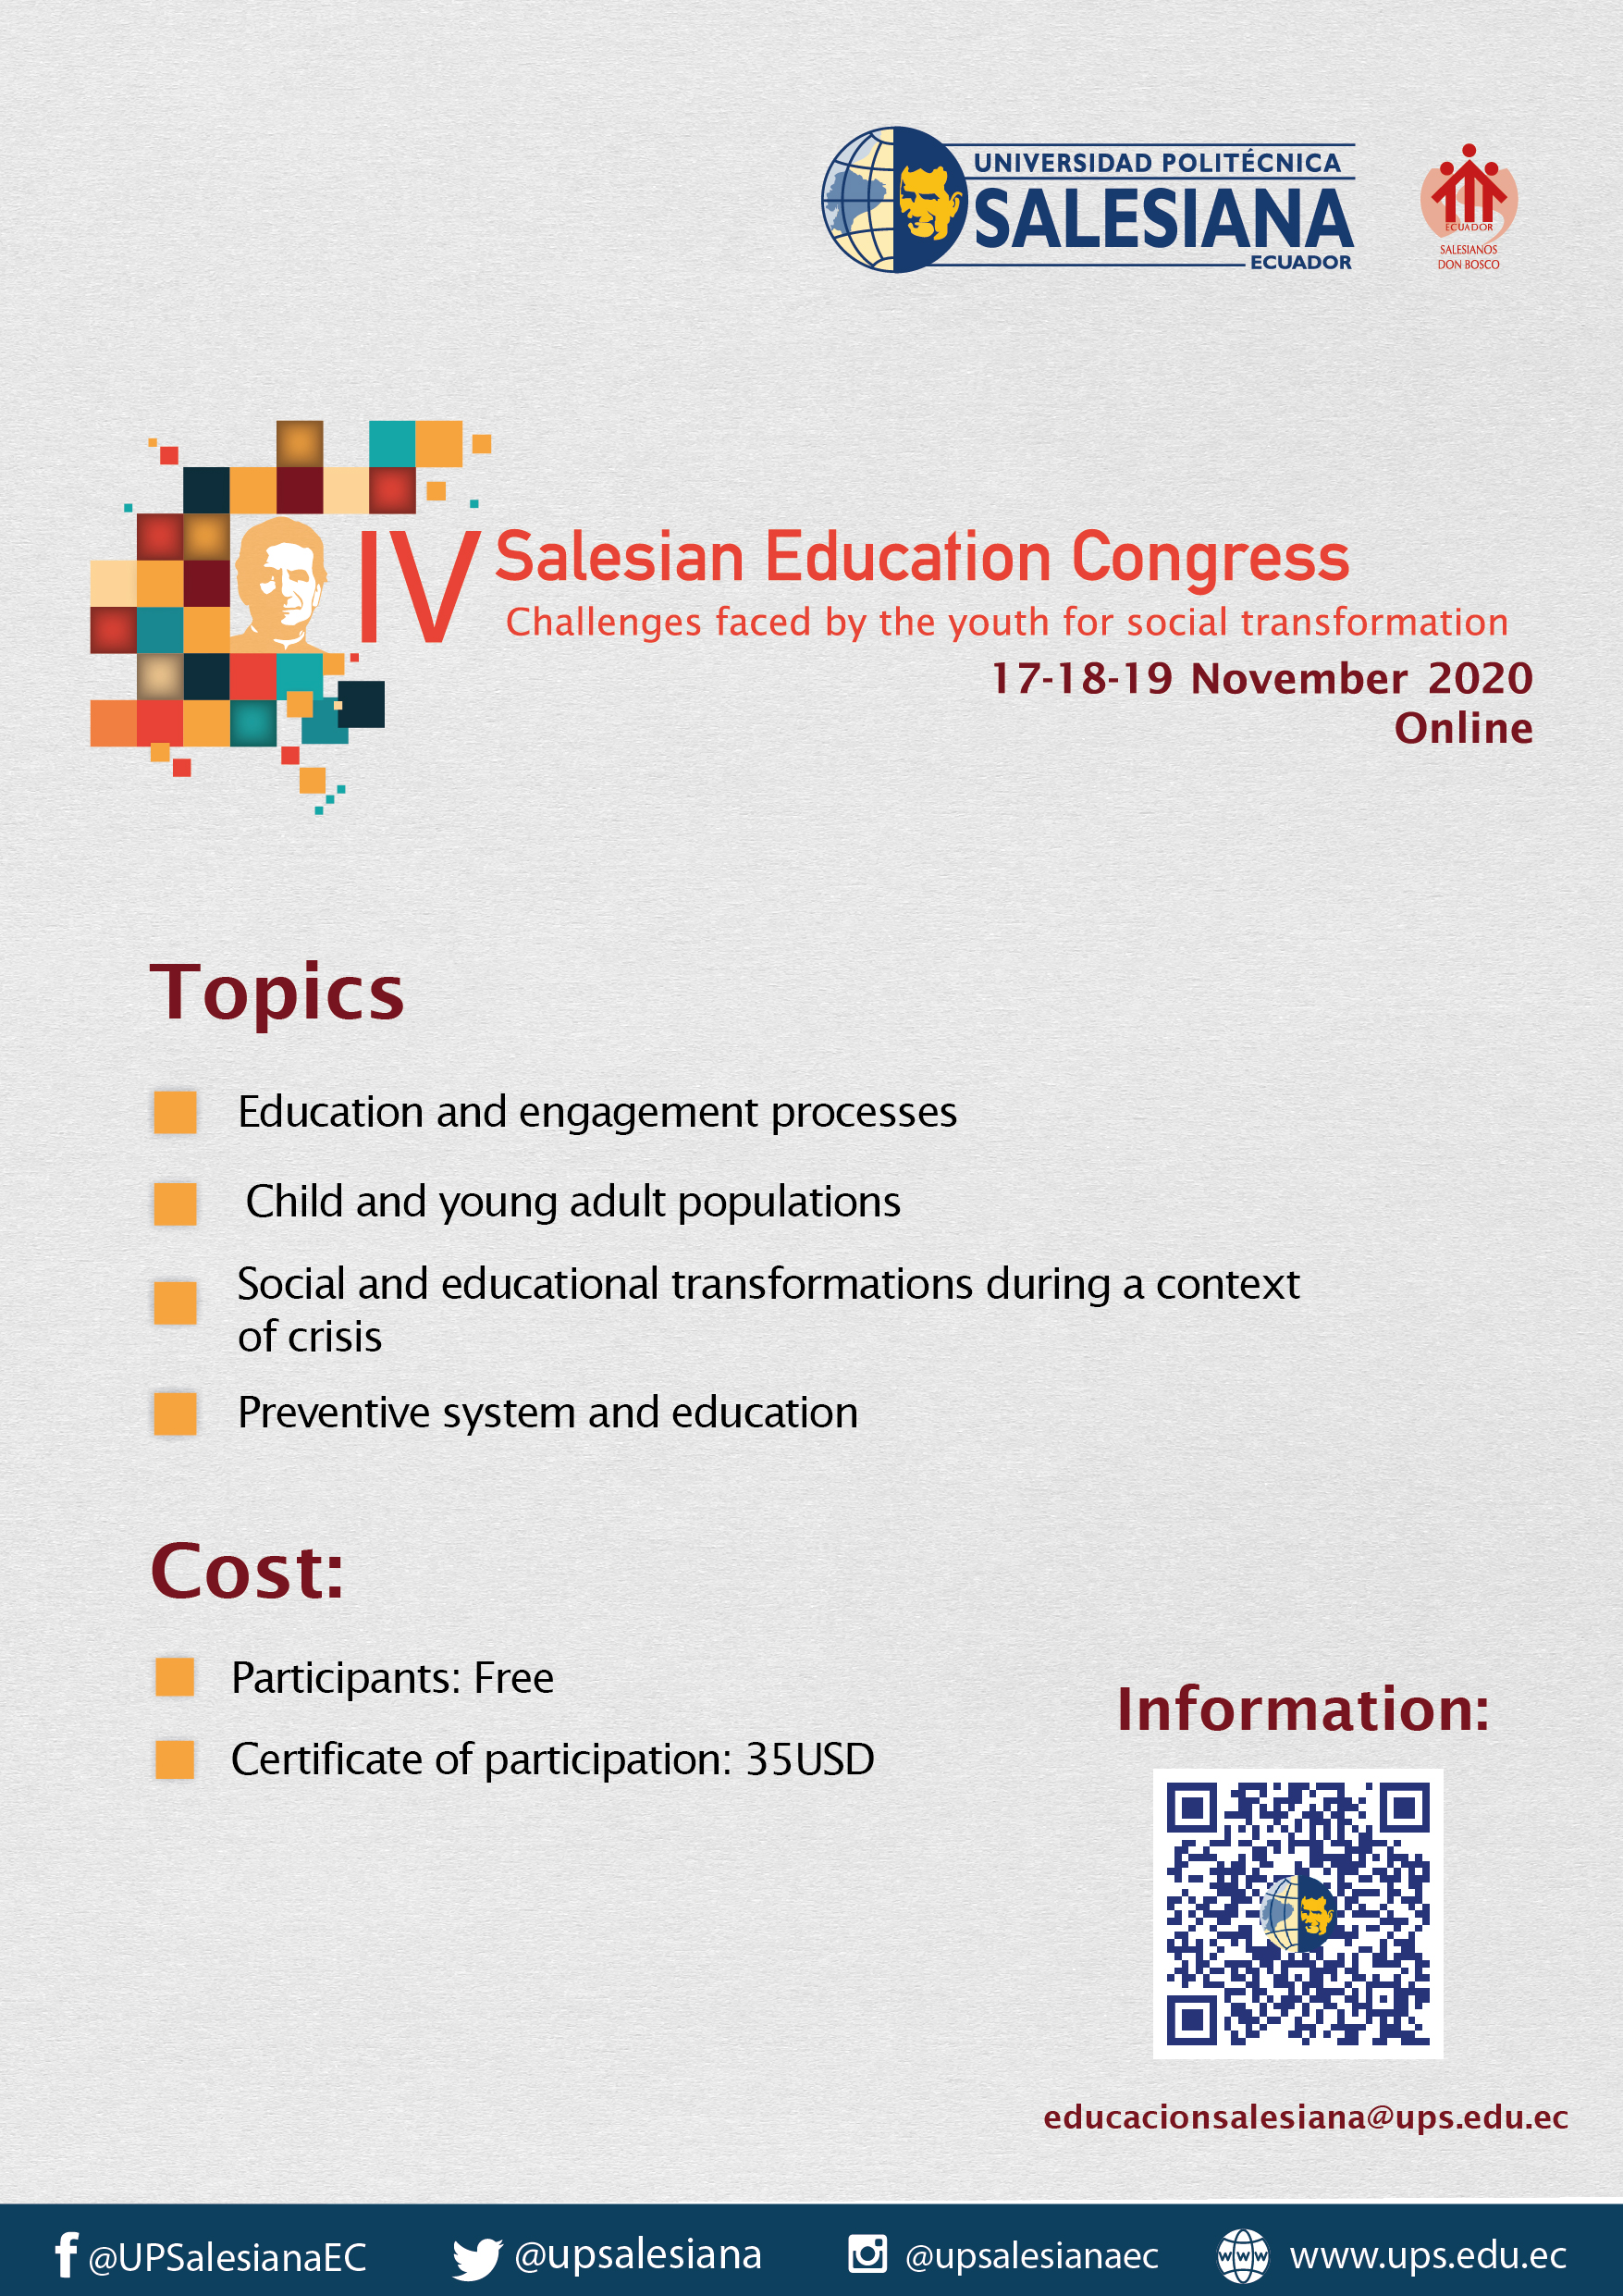 IV Salesian Education Congress hosted by the Salesian Polythecnic University of Ecuador